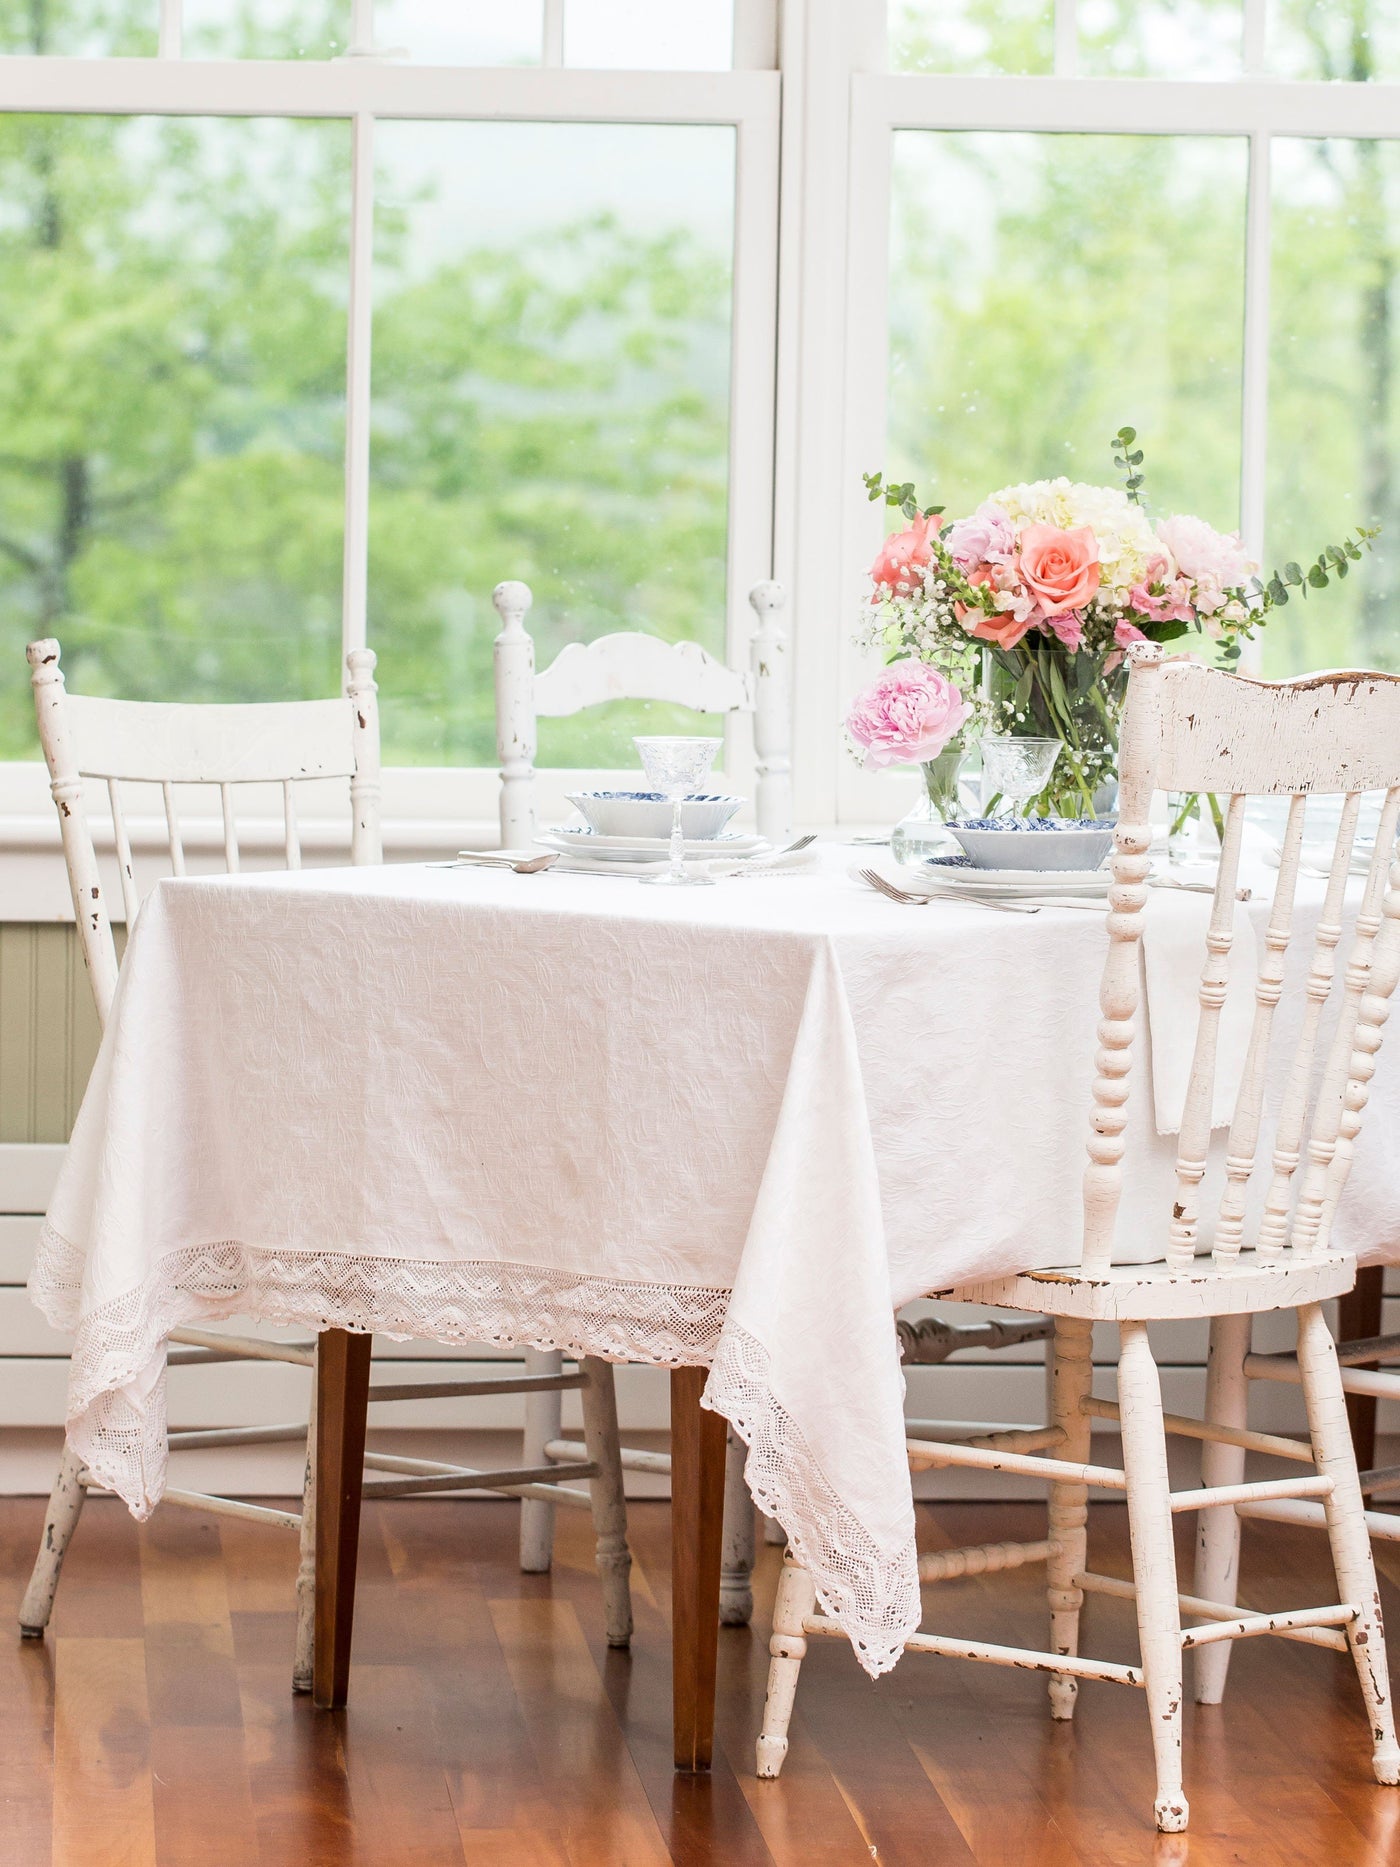 Nectarine Tart Jacquard Tablecloth in Ivory | April Cornell- SOLD OUT